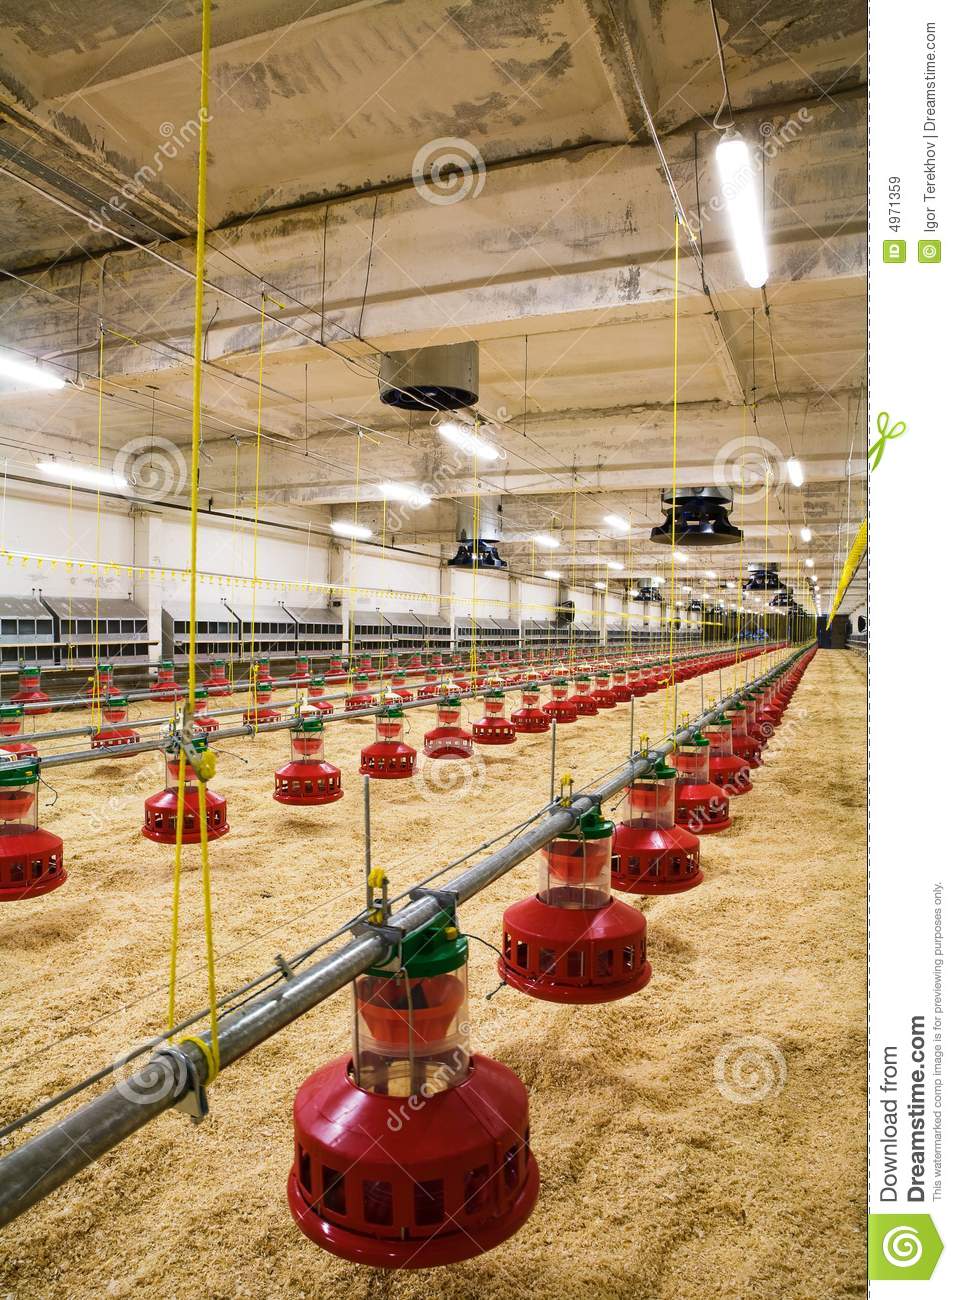 Poultry Farm Royalty Free Stock Images   Image  4971359